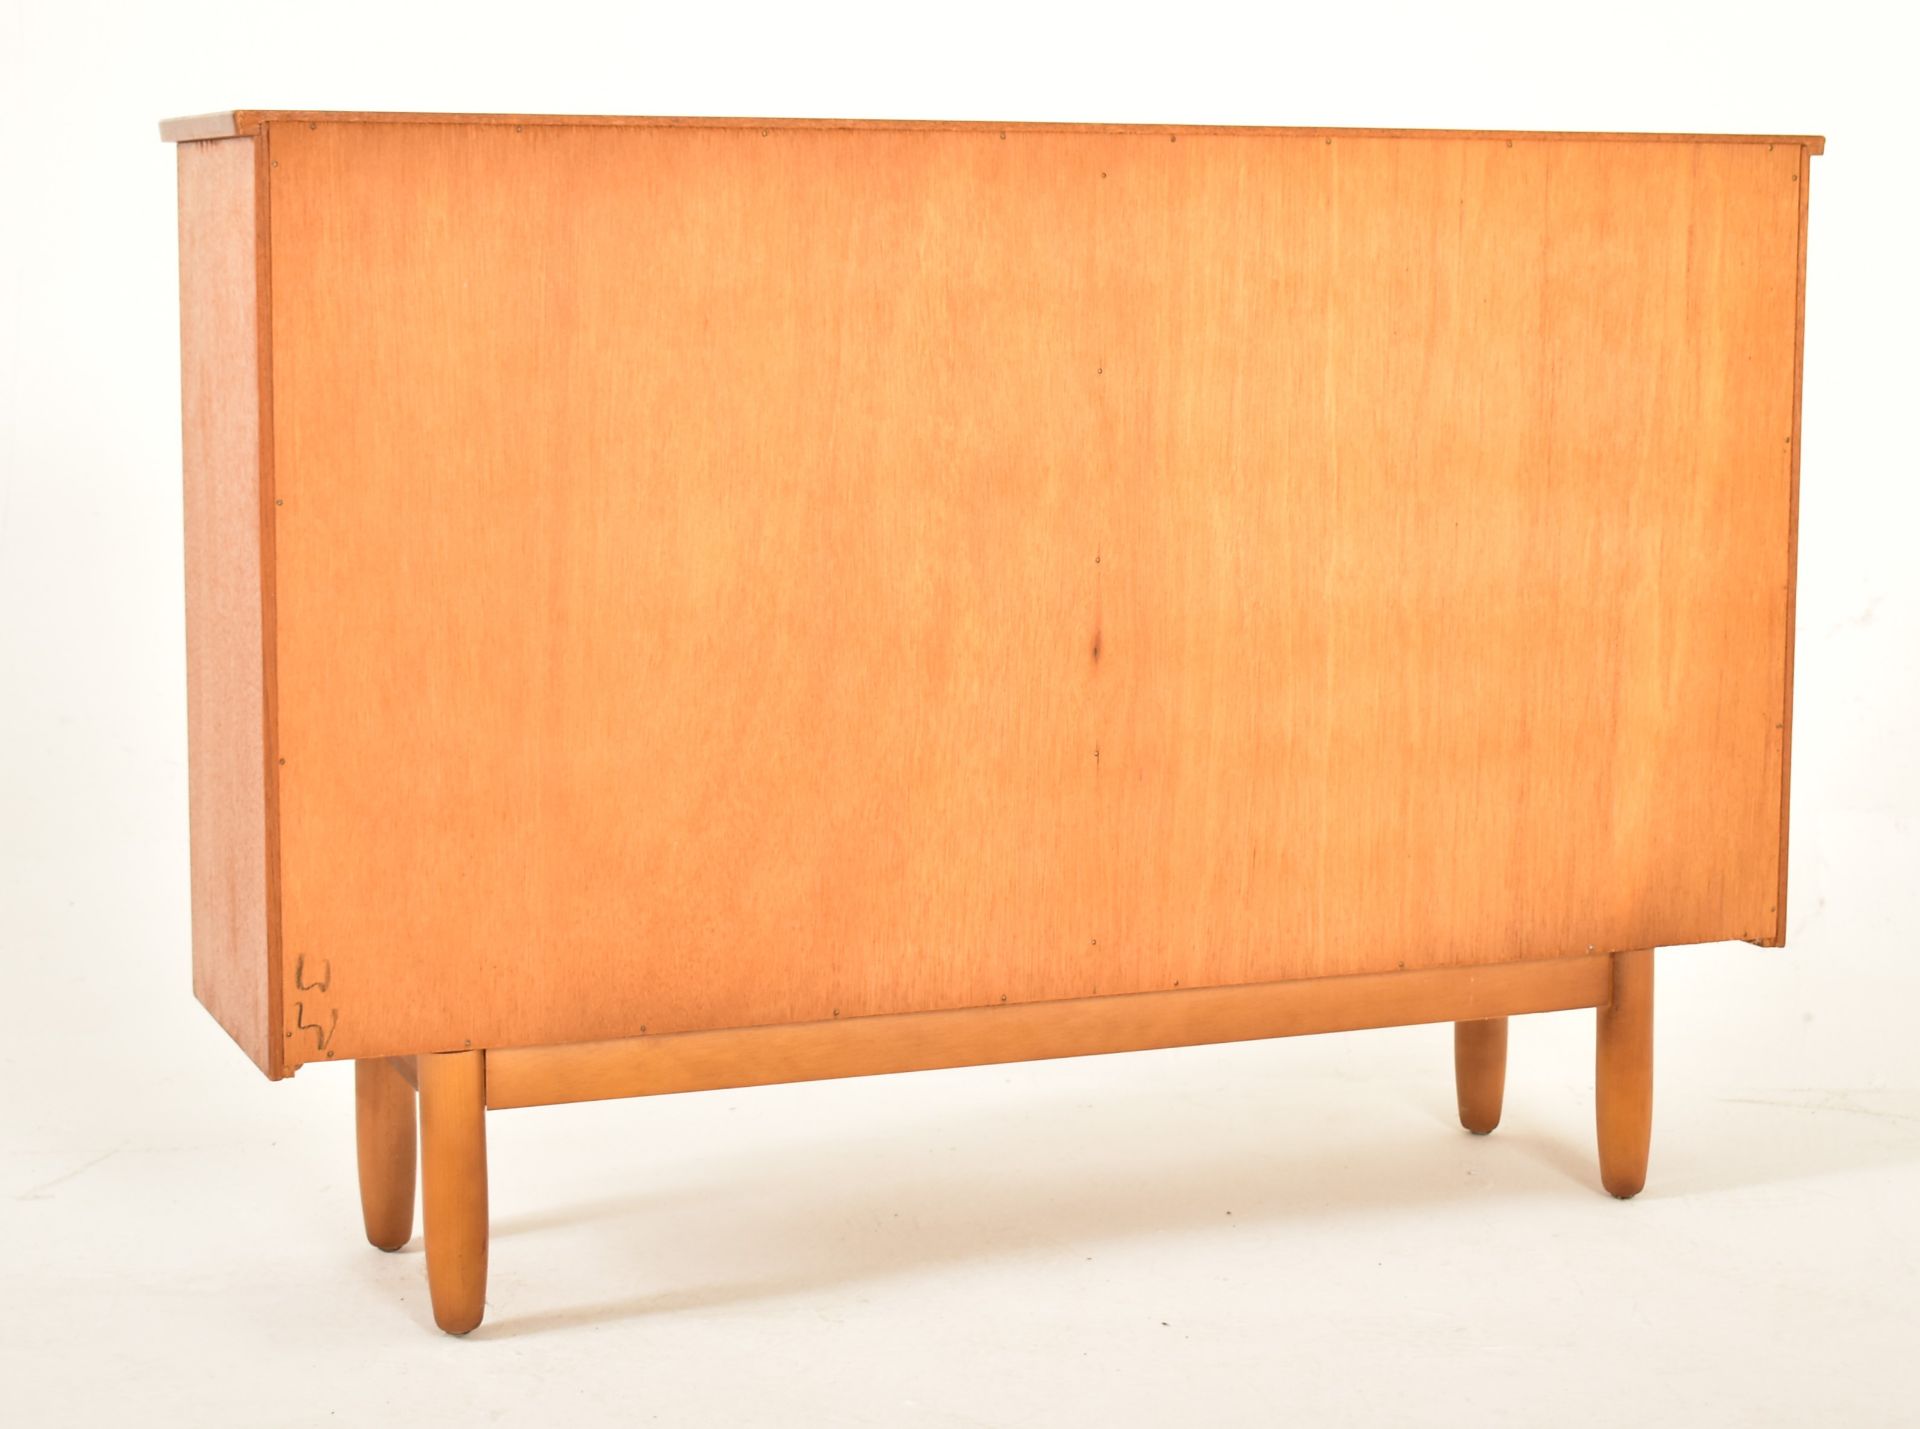 MID CENTURY TEAK AND GLASS DISPLAY CABINET / BOOKCASE - Image 5 of 6